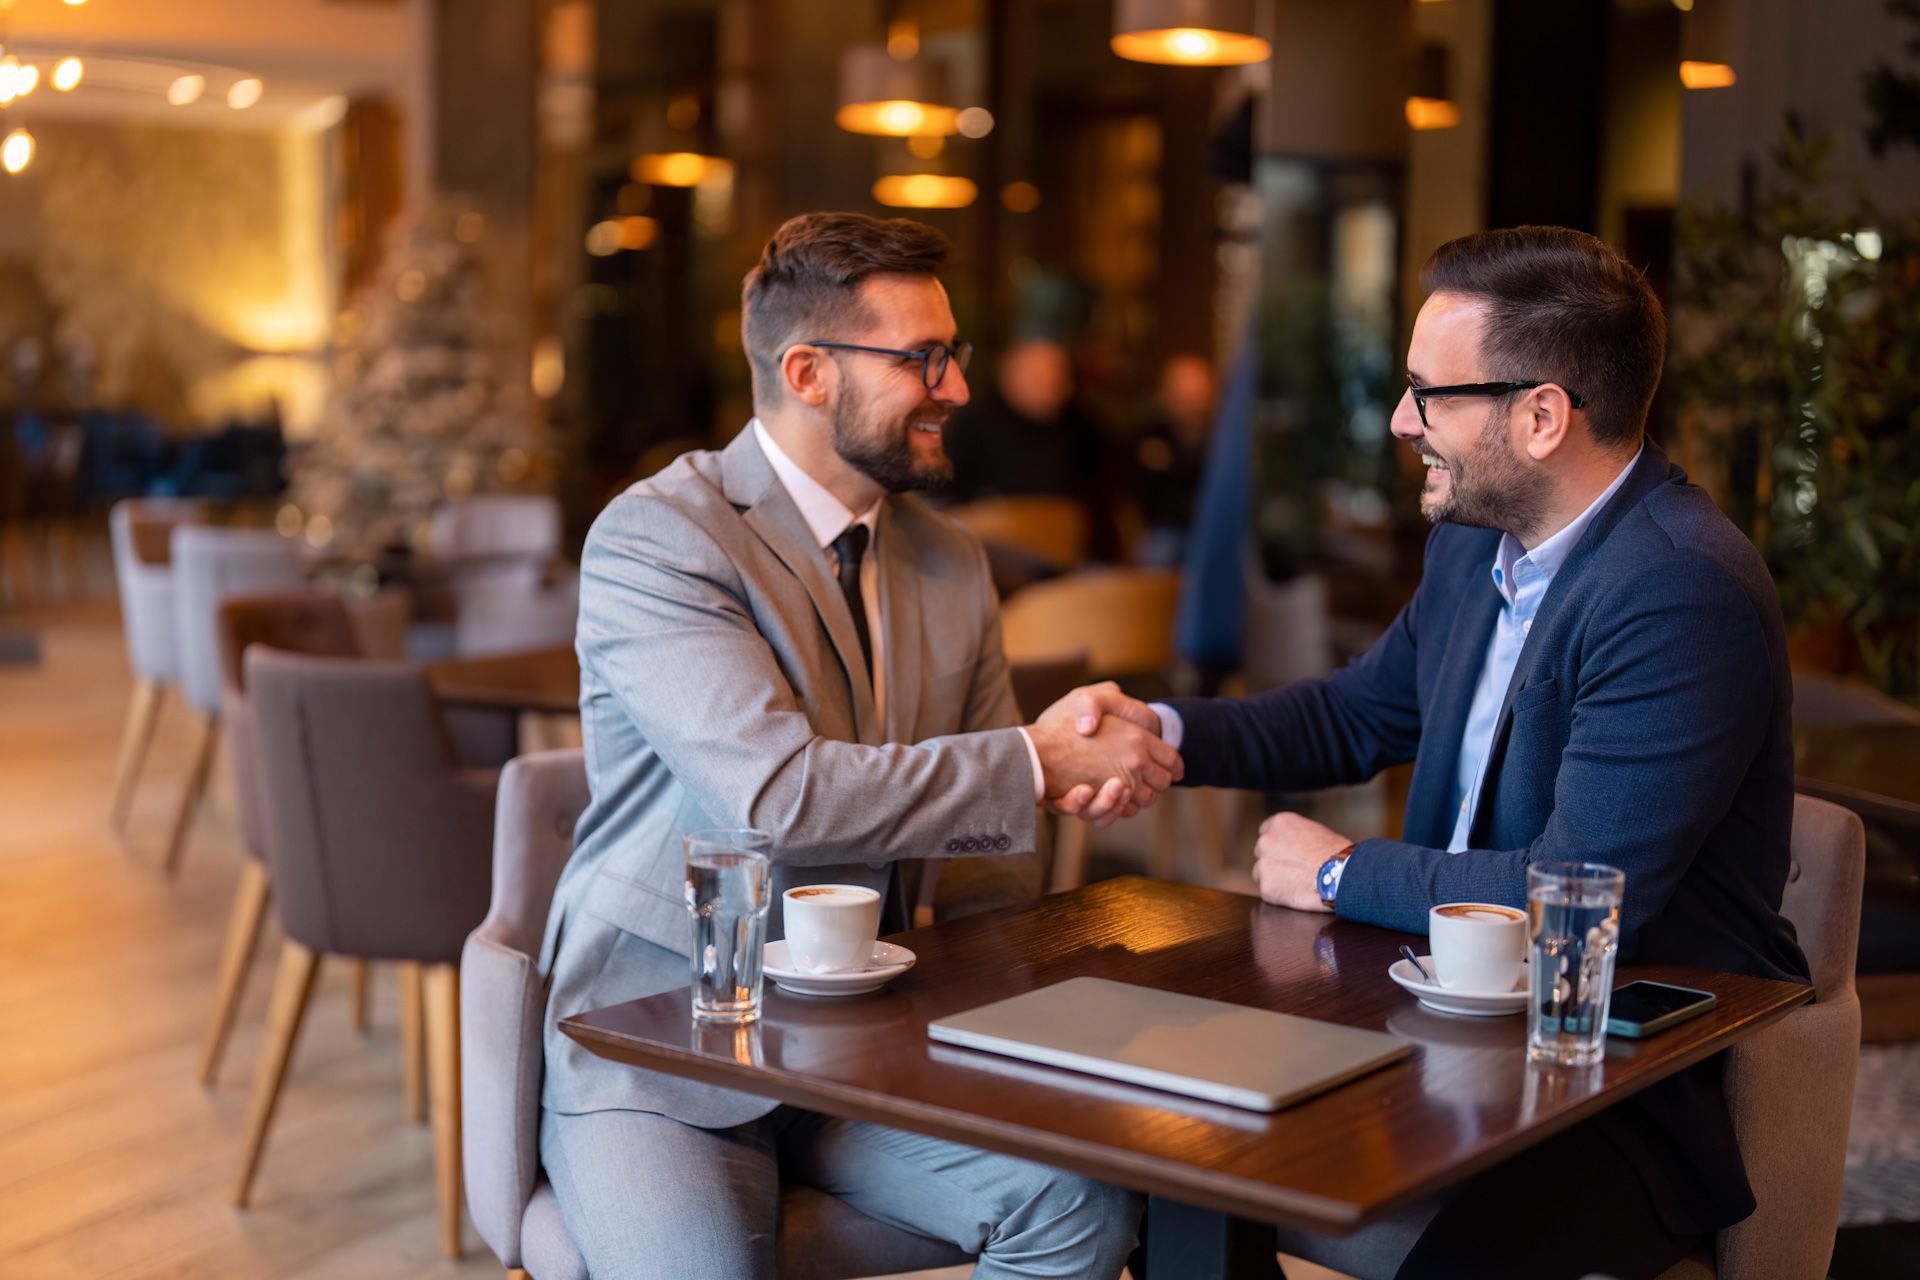 Two men are shaking hands while sitting at a table in a restaurant